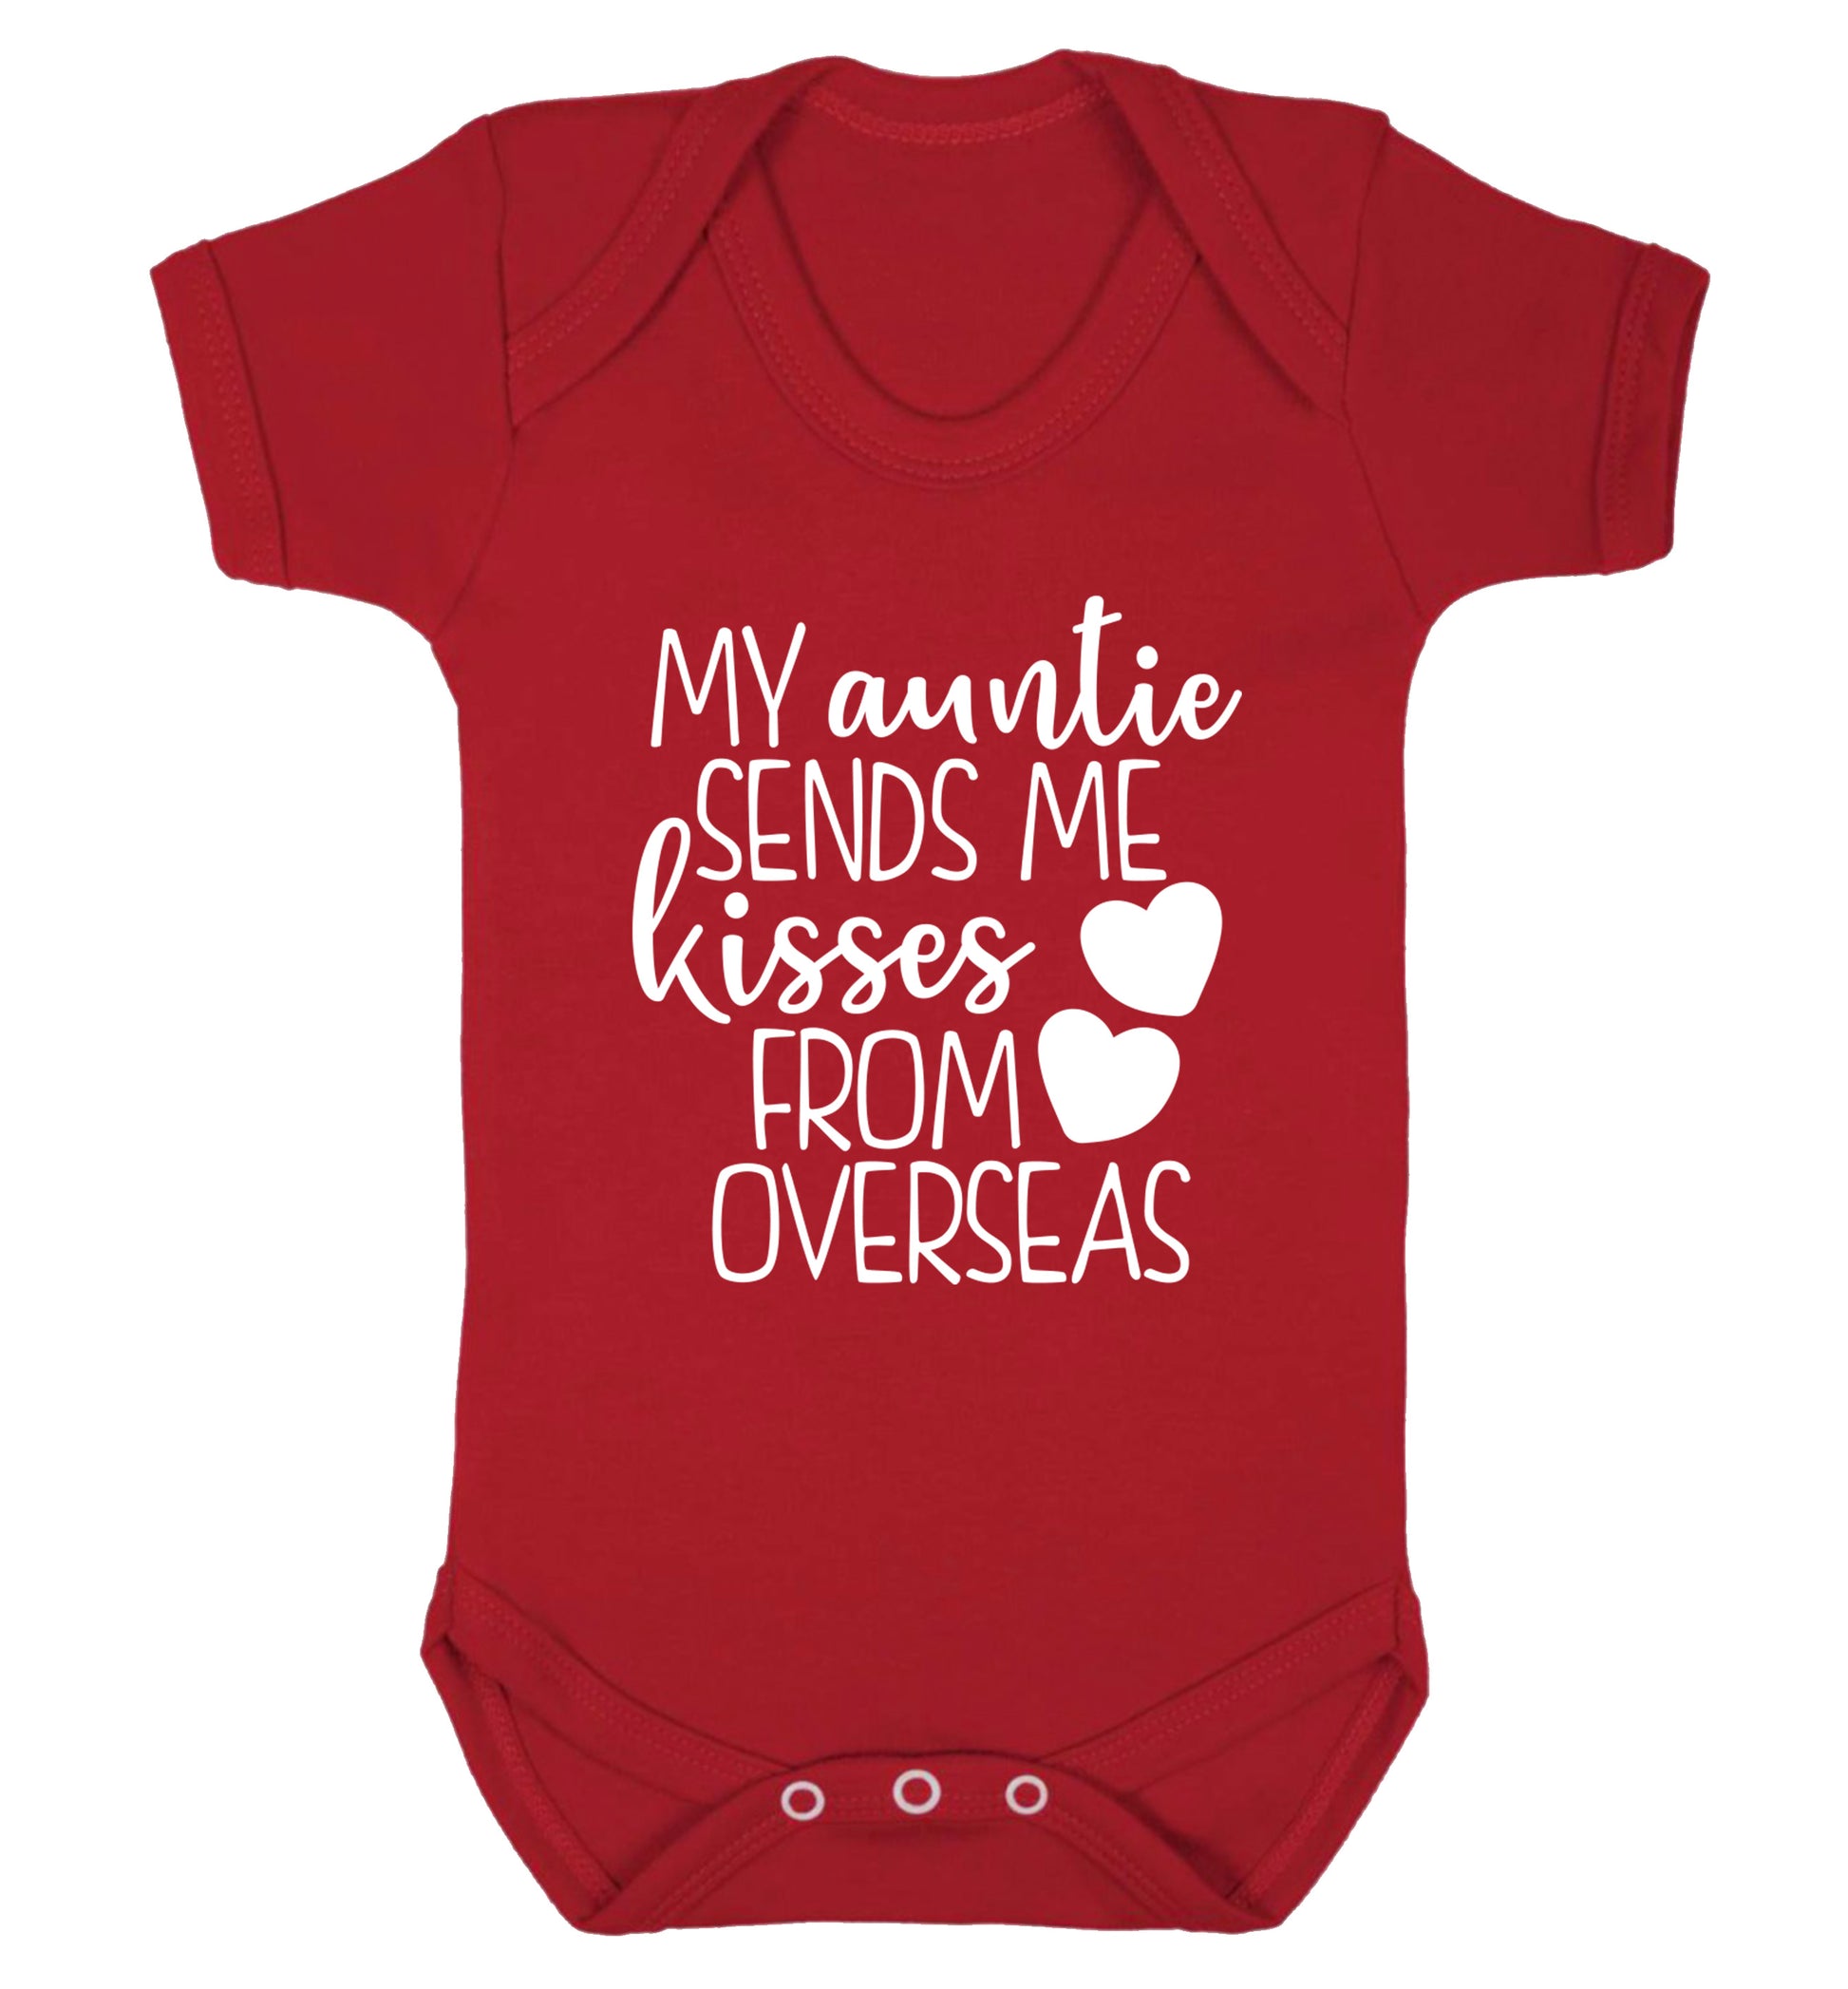 My auntie sends me kisses from overseas Baby Vest red 18-24 months